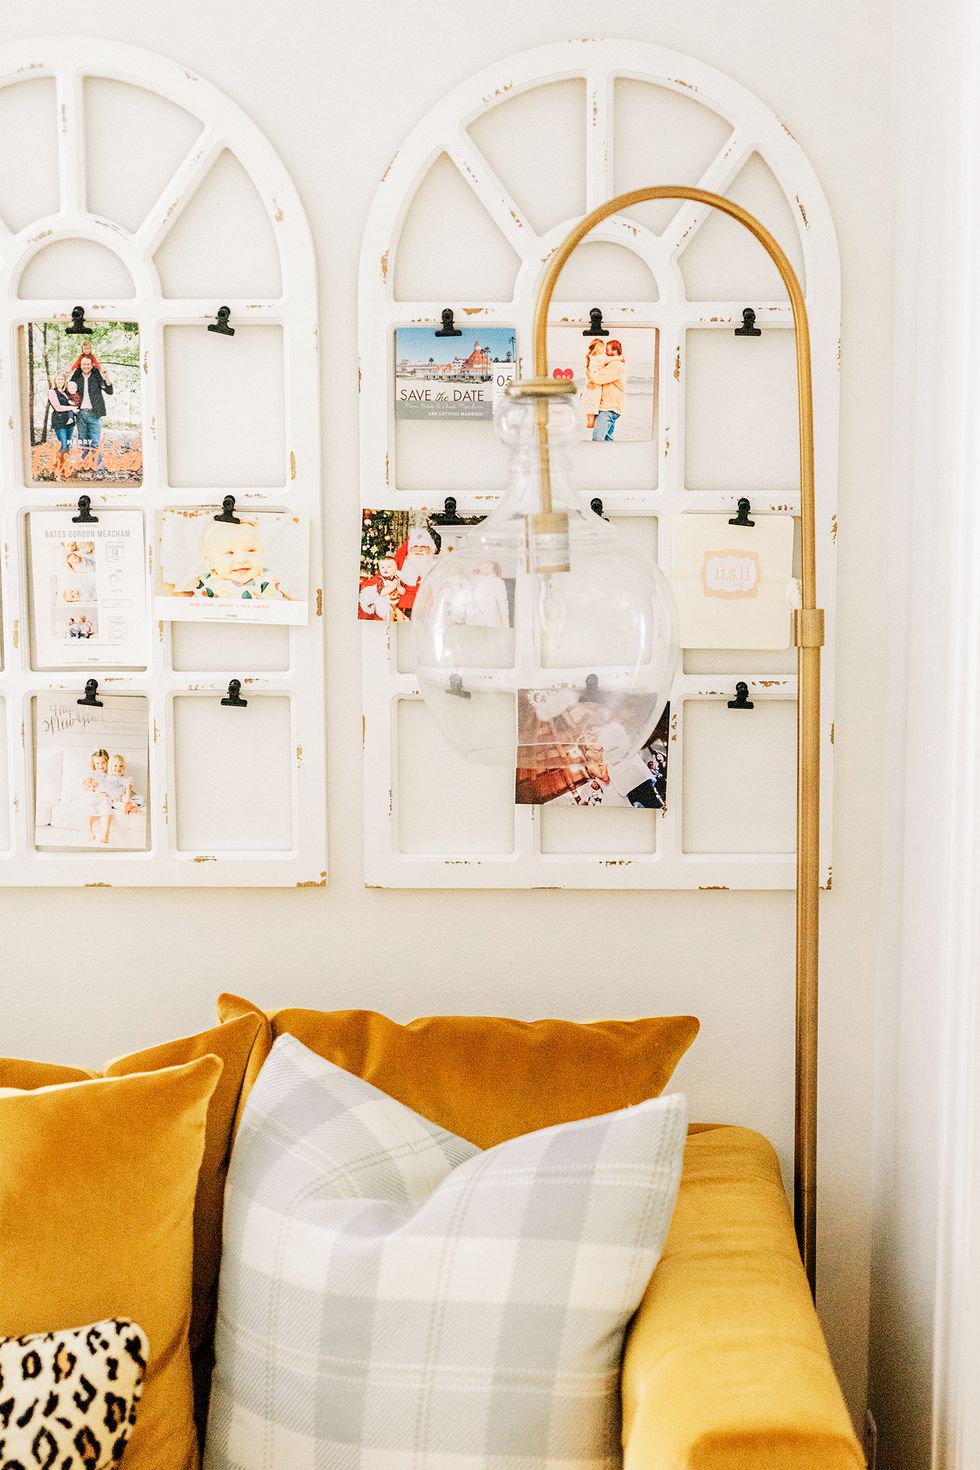 DIY wall art: Easy DIY projects to decorate on a budget